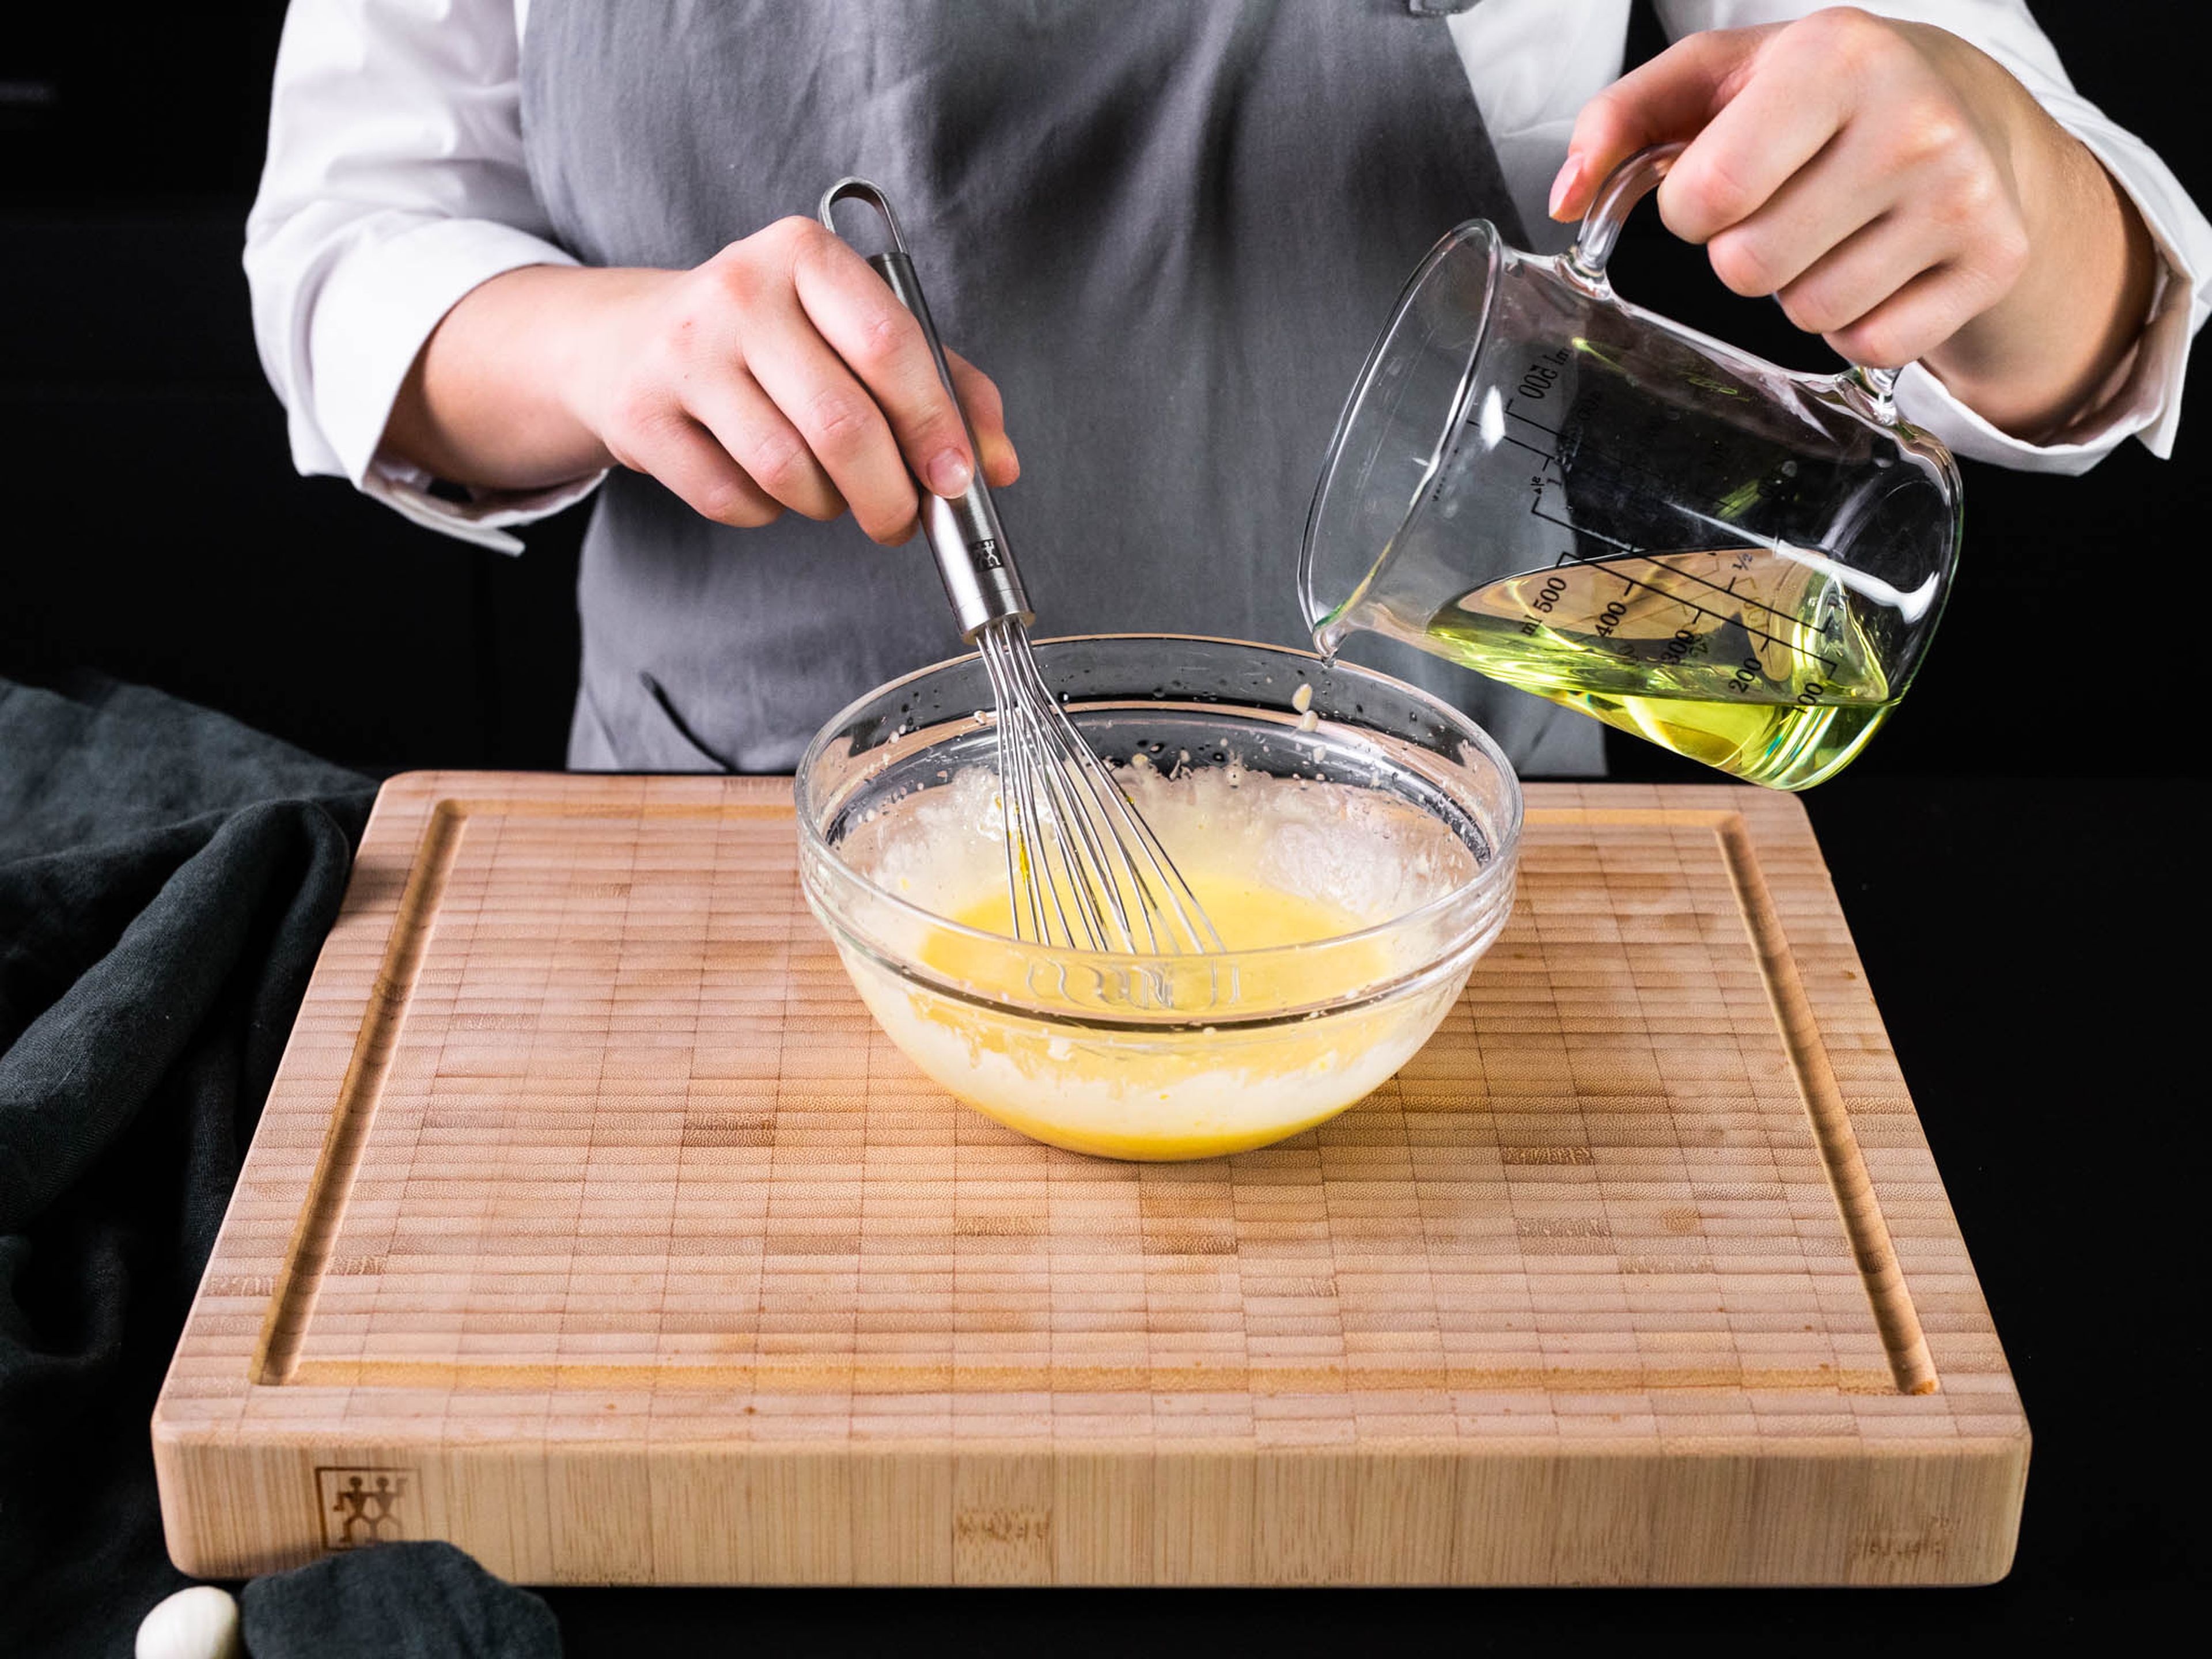 In a bowl, add egg yolk, zest and juice of half a lemon, mustard, and salt, stir and mix together. Drizzle vegetable oil in the bowl, at the same time, keep stirring continuously until a smooth mixture is formed.